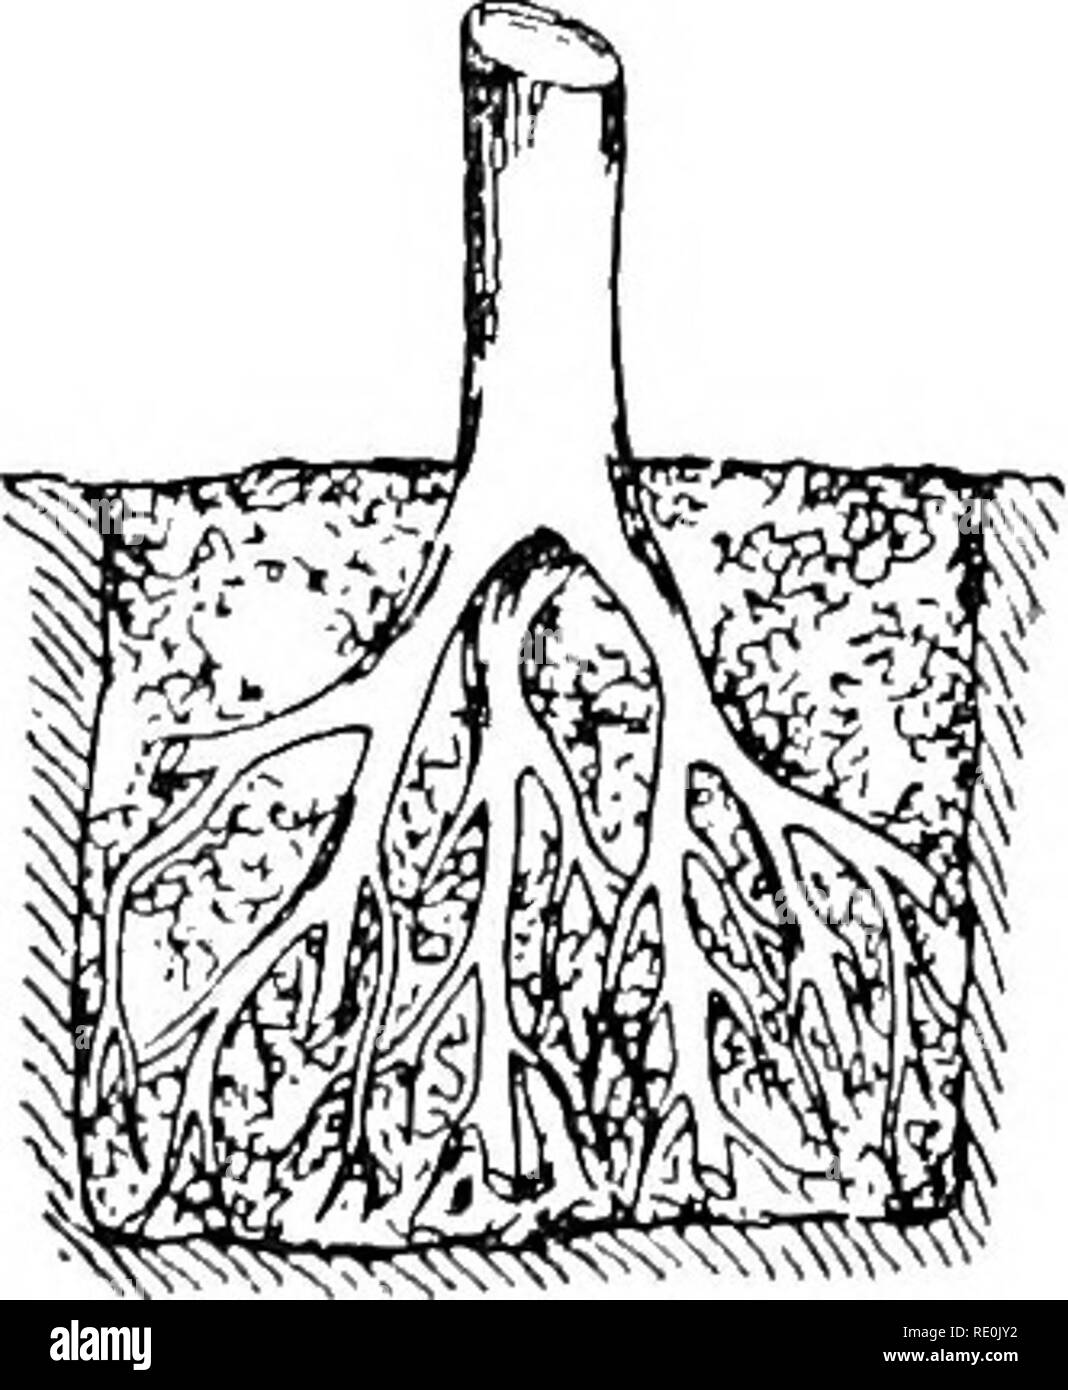 . Principles of plant culture; an elementary treatise designed as a text-book for beginners in agriculture and horticulture. Horticulture; Botany. Fig. 133. Fig. 134. Fig. 133. Roots of tree properly planted. Fig. 134. Same improperly planted. can best be spared should be removed (420). F'ailure to properly reduce the top is a frequent cause of death or loss of vigor in transplanted trees. Small plants in leaf, such as the strawberry, cabbage, etc., usually en- dure transplanting better if their larger leaves are re- moved at replanting. d—Wetting the roots just before- replanting is quite imp Stock Photo